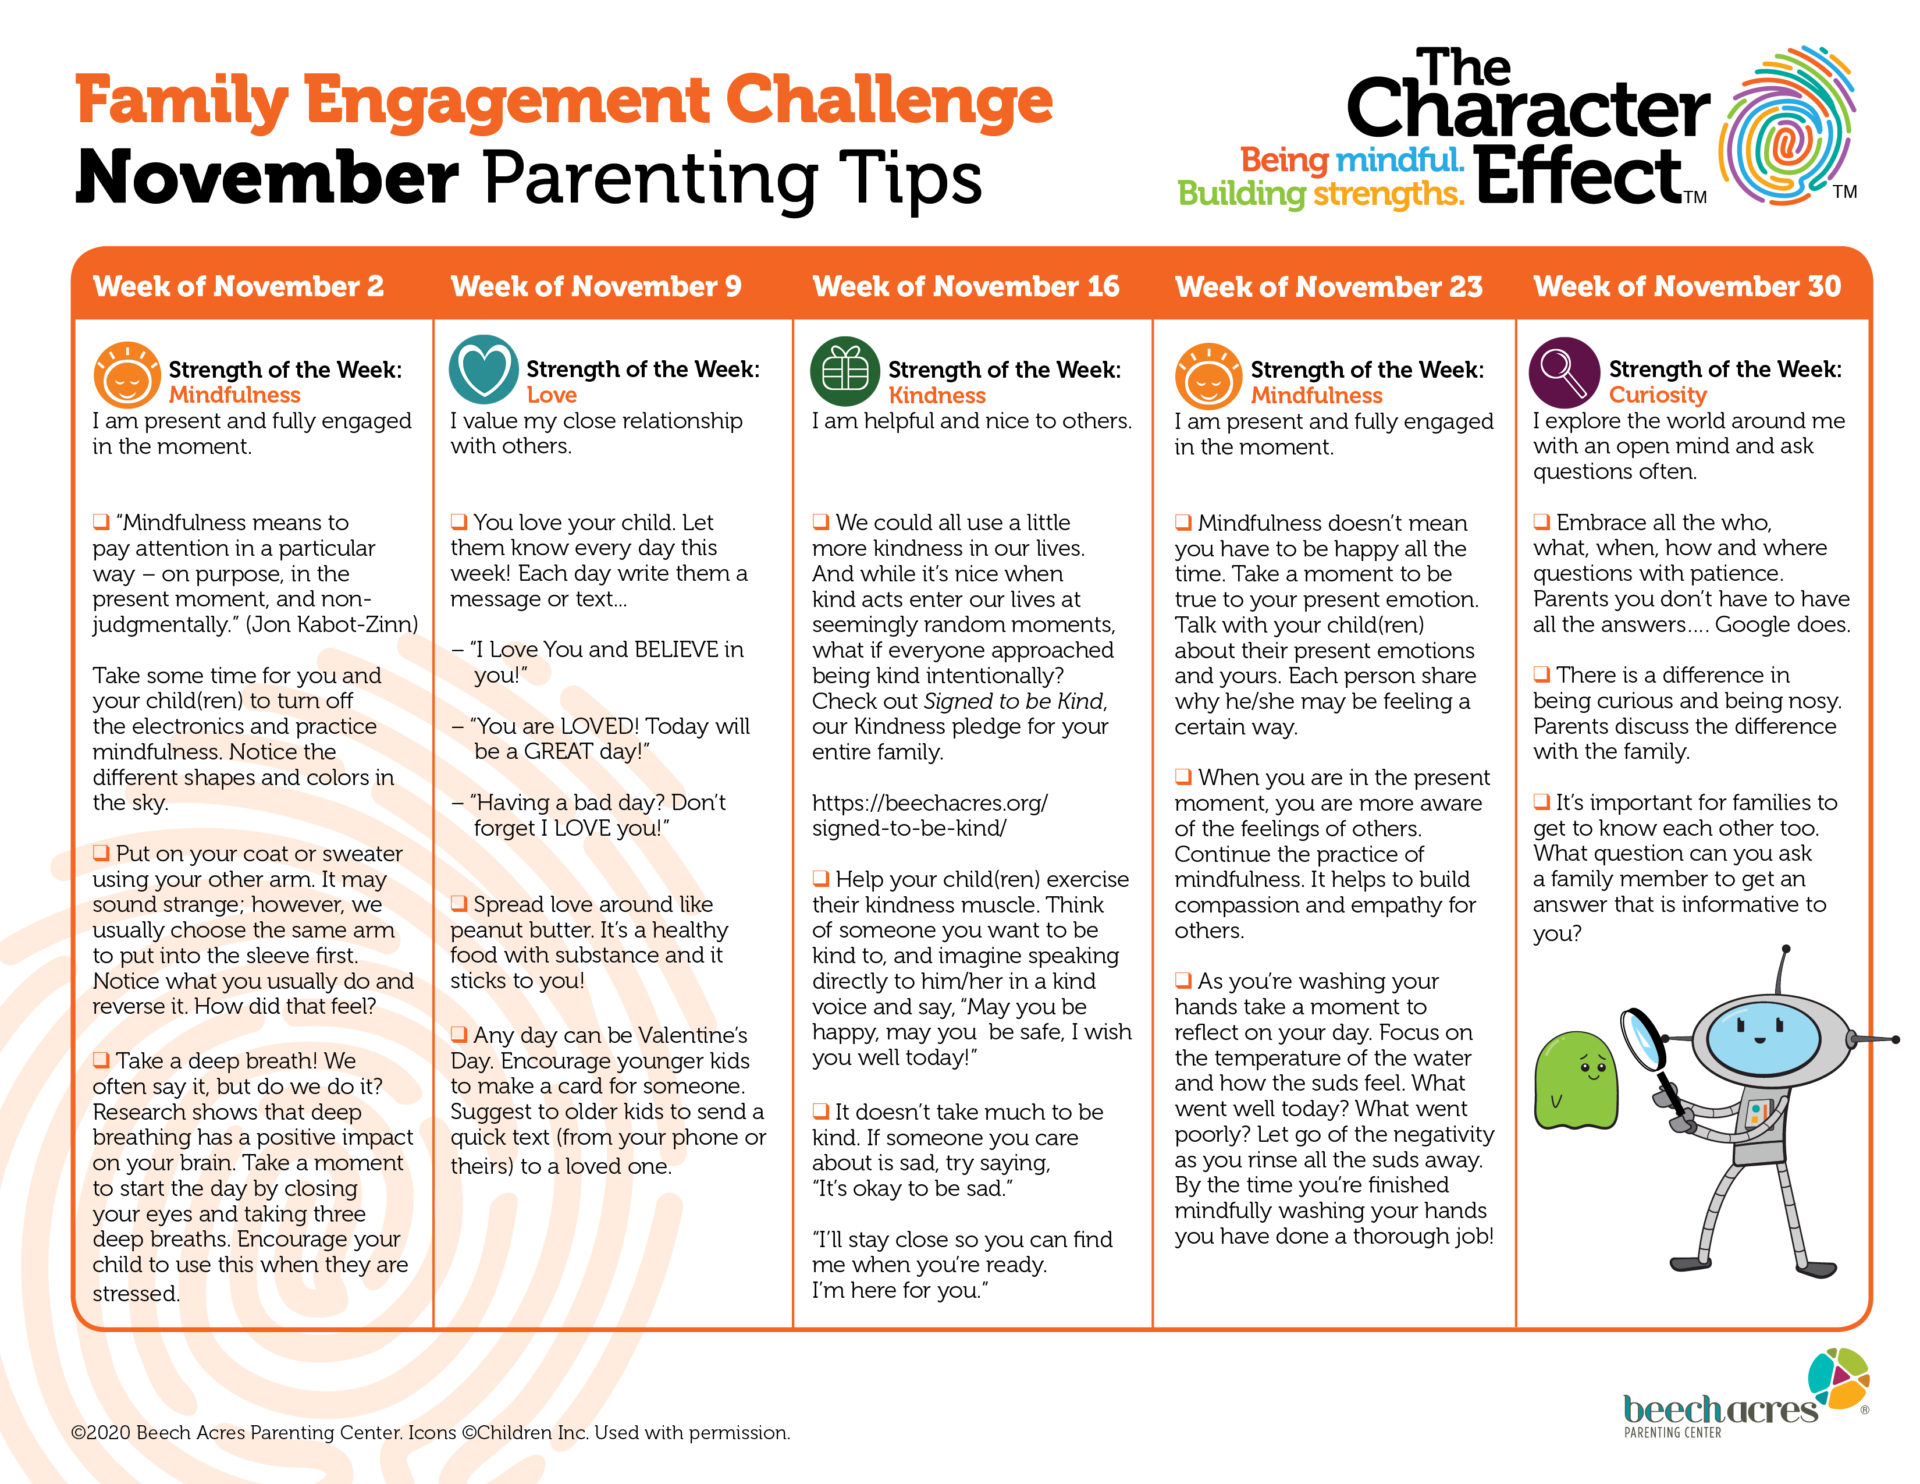 November Family Engagement Challenge From The Character Effect™